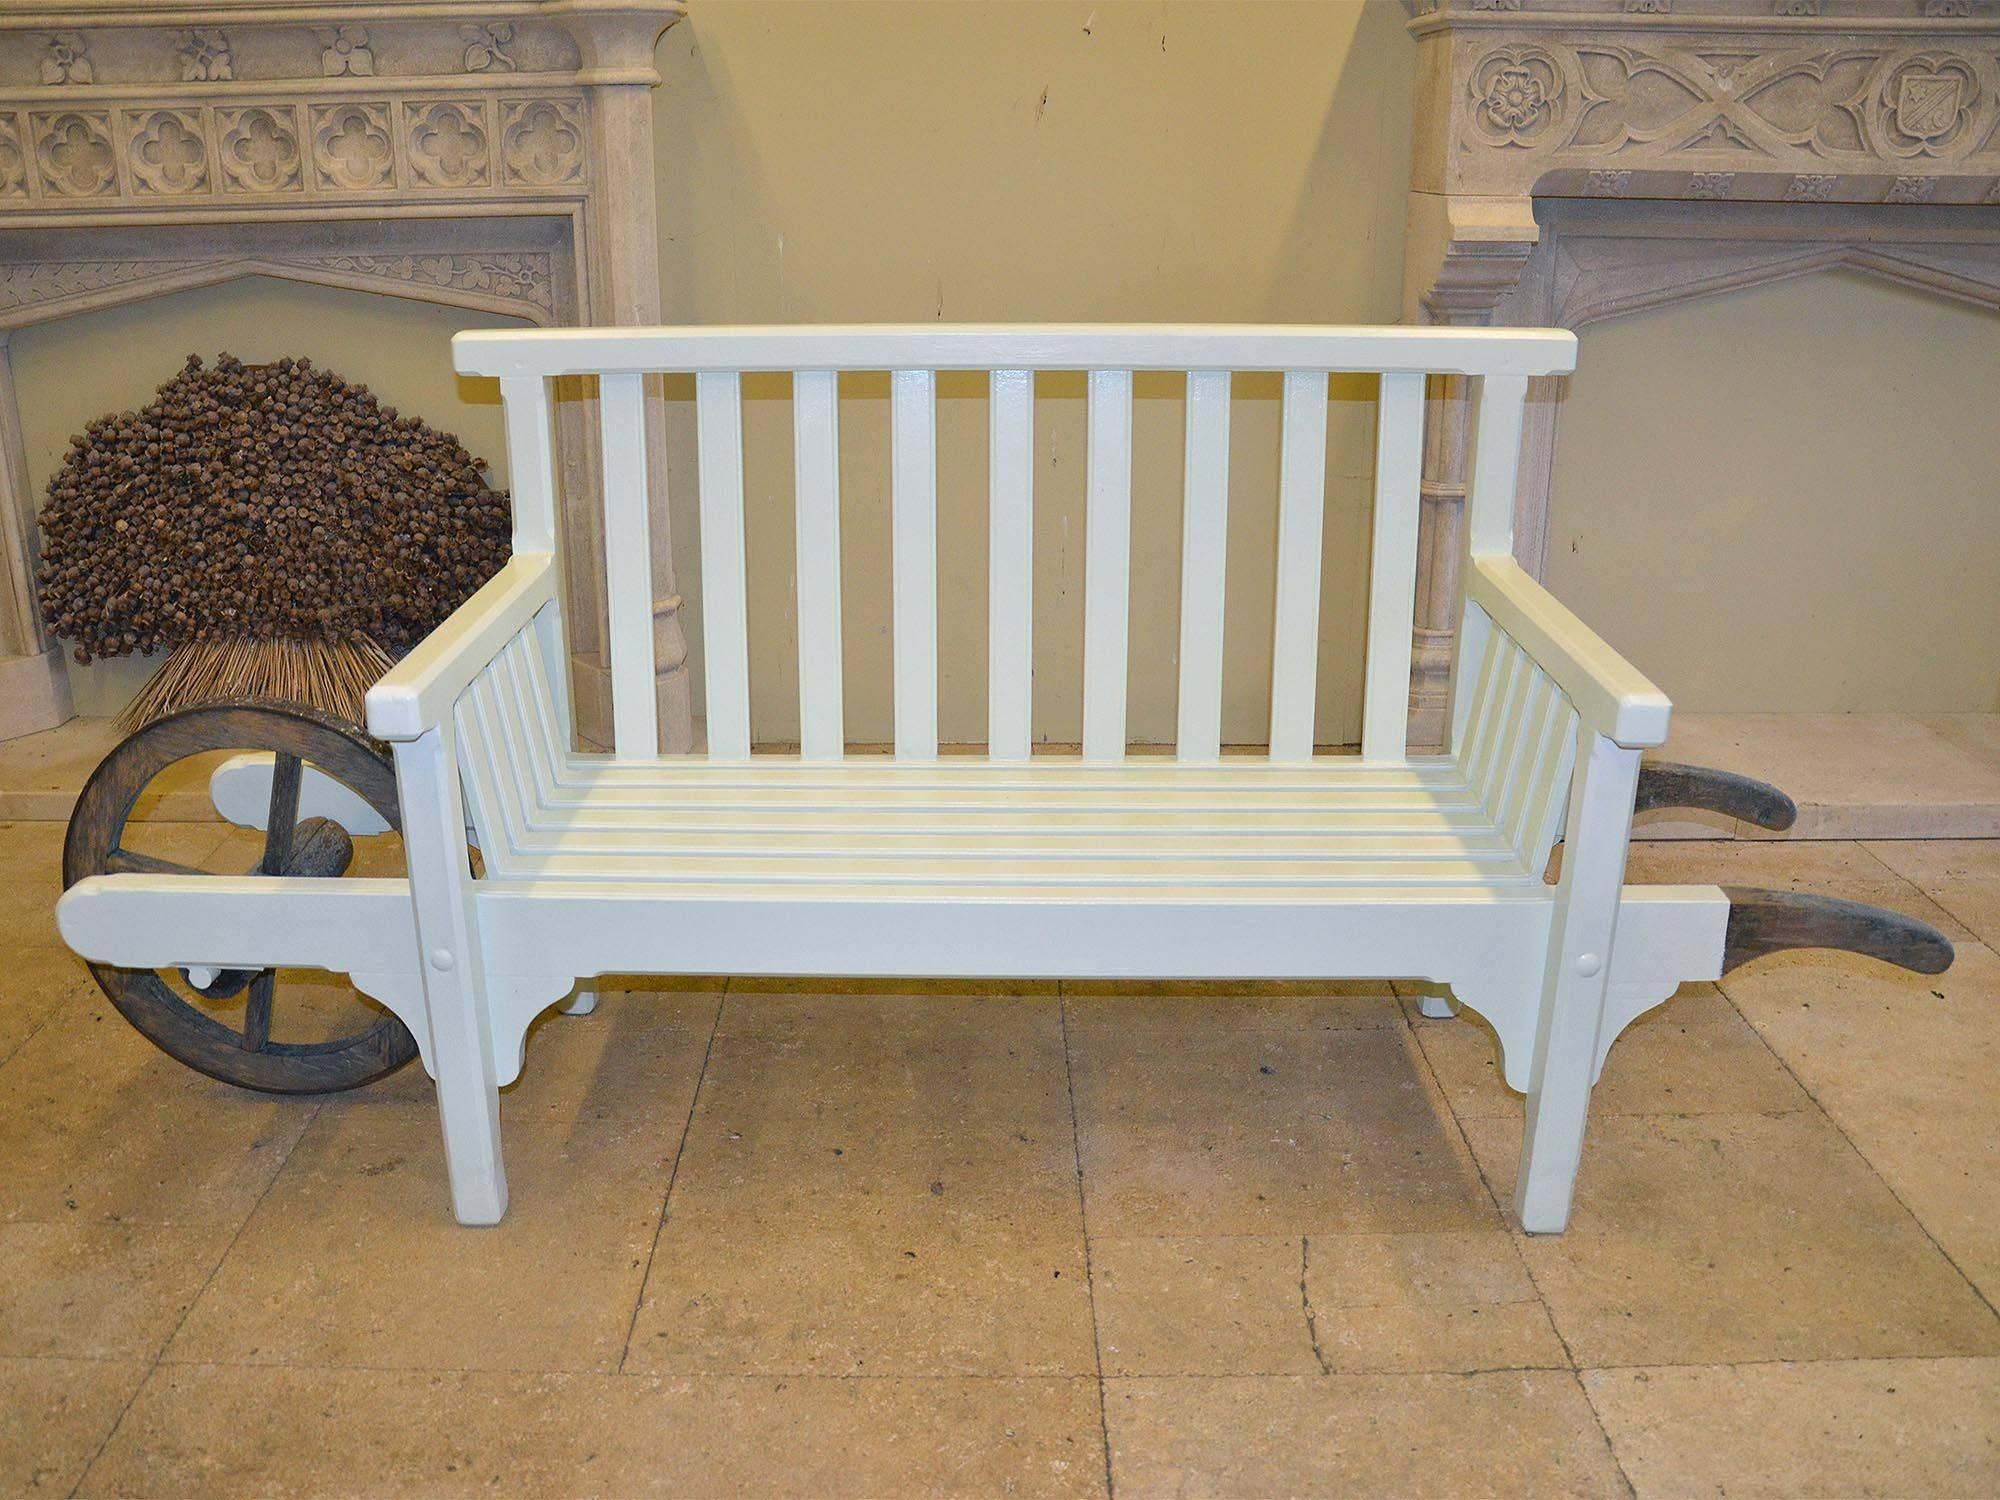 Originally made by the Chatsworth Joinery this seat has now been carefully restored and repainted to be as good as new. Of wheelbarrow form, the bench is both comfortable and eminently transportable around the garden.